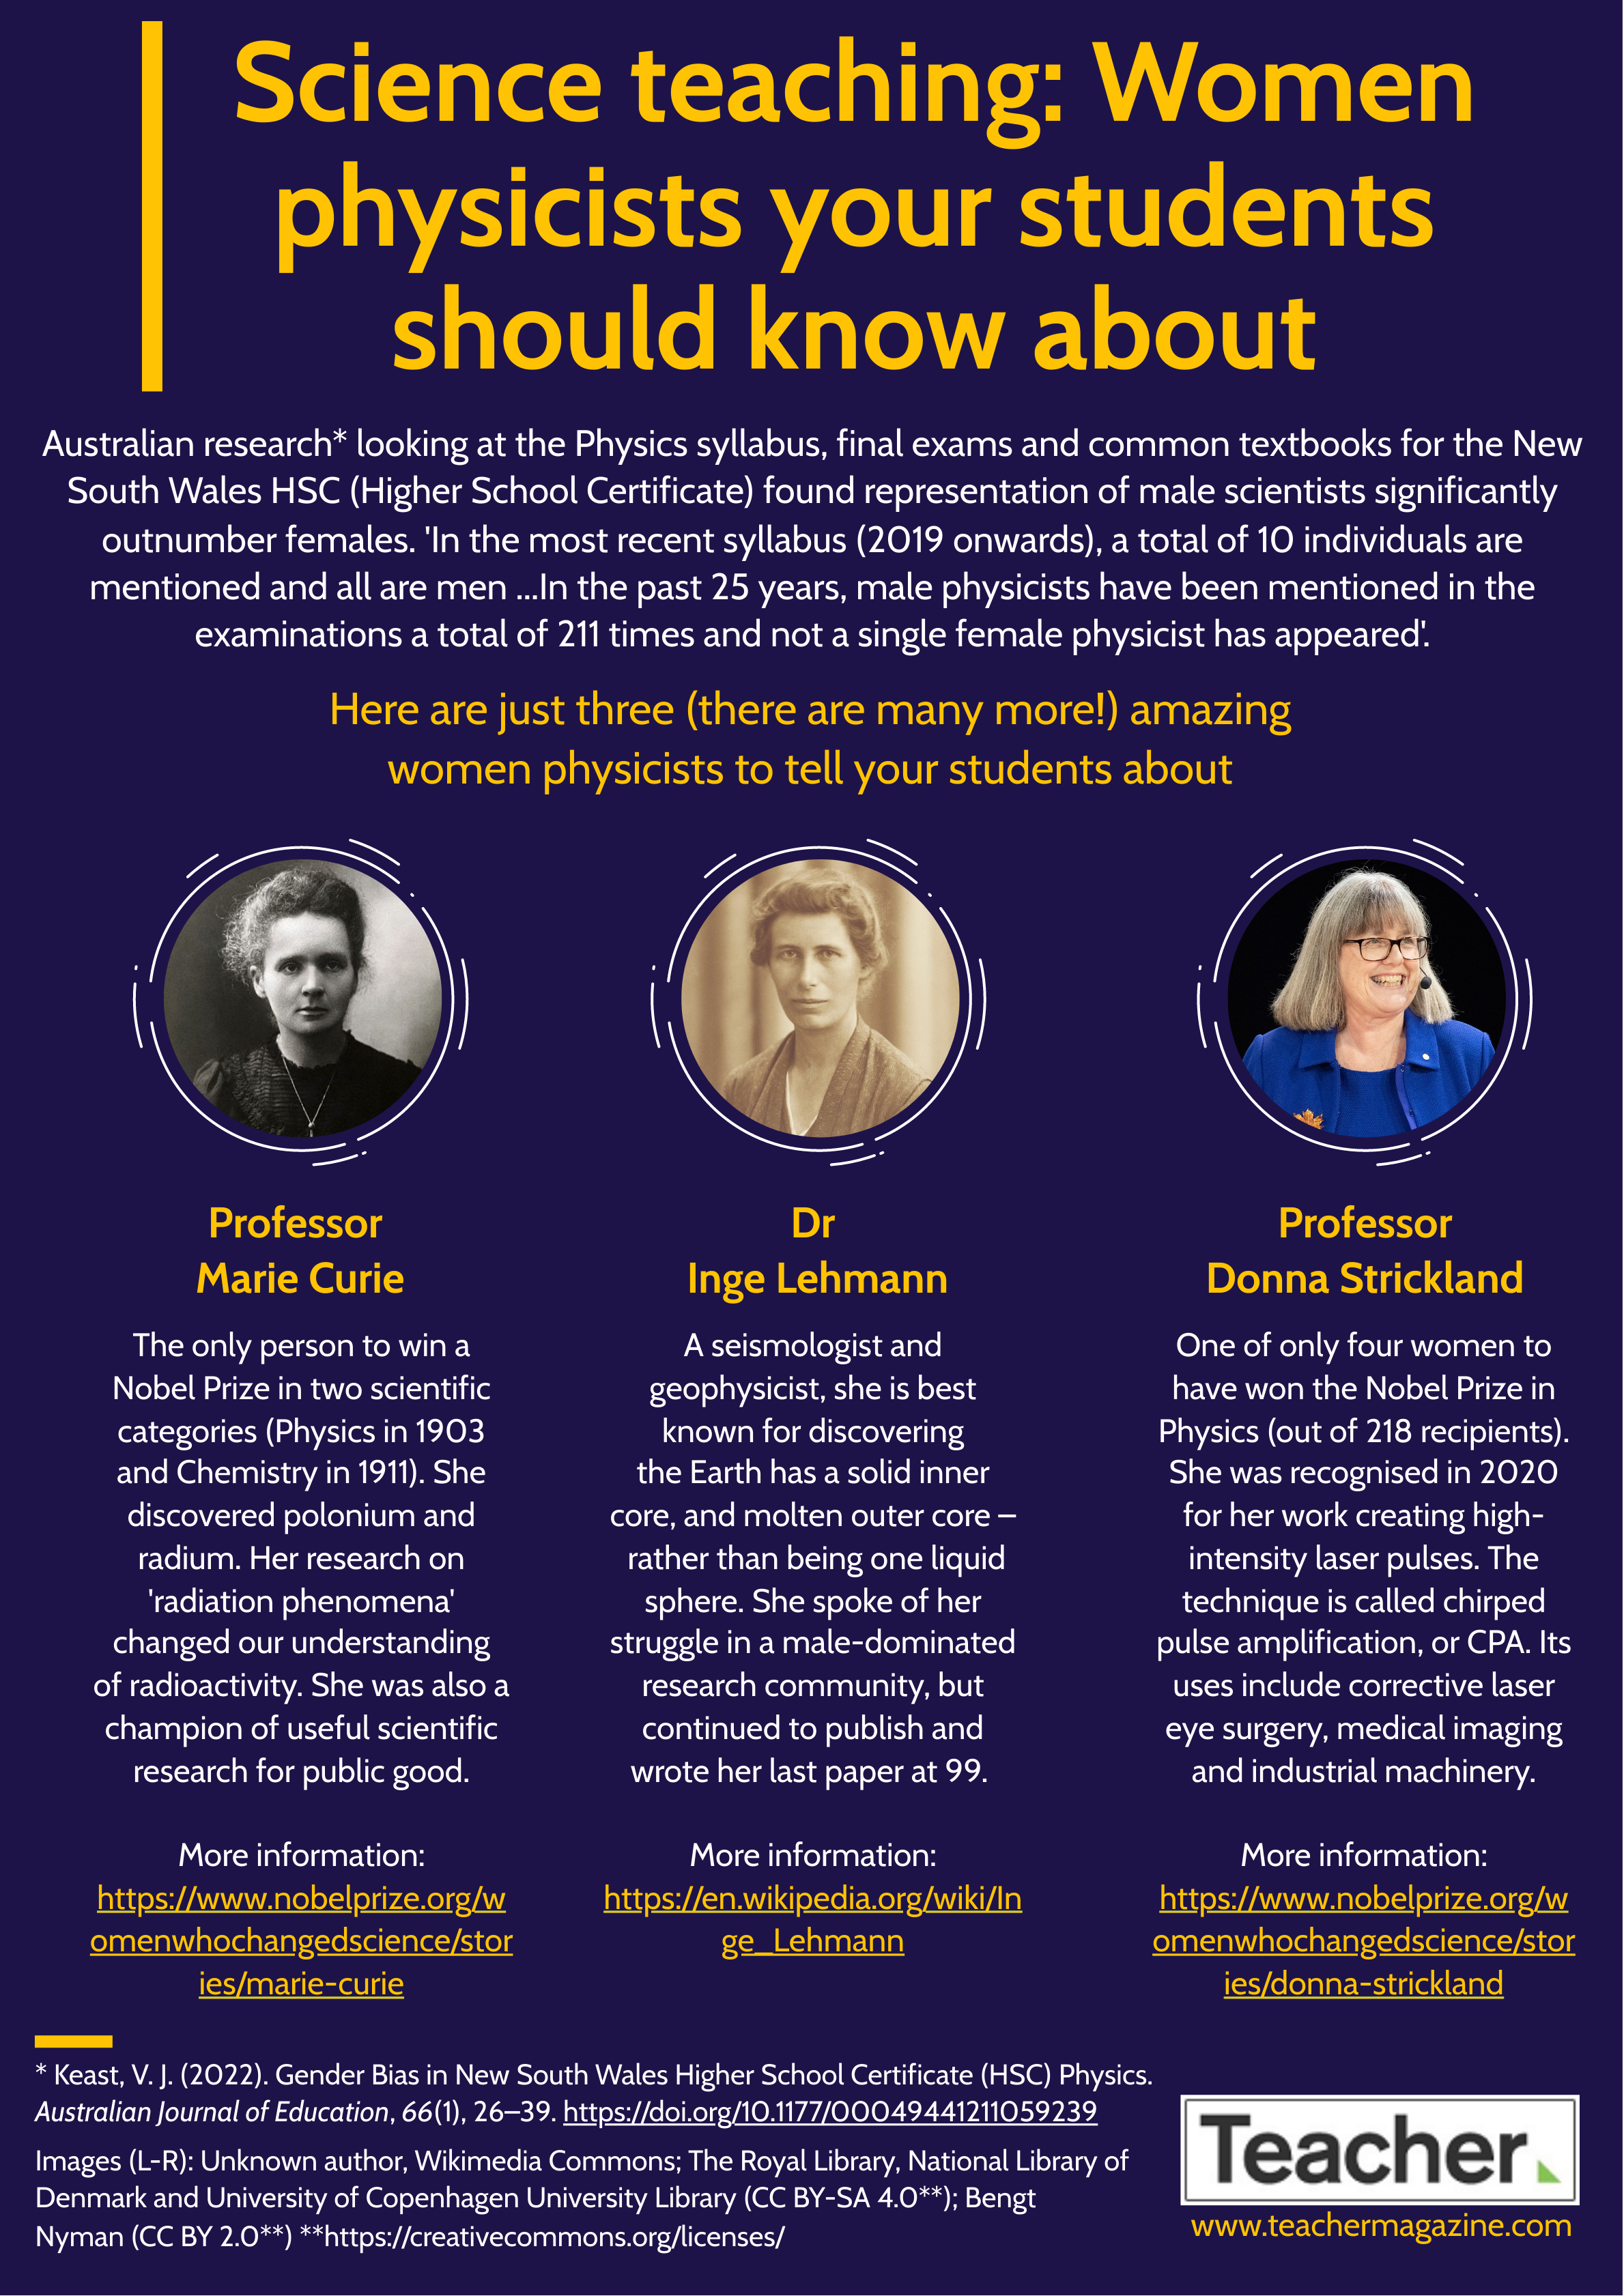 Infographic: Science teaching - women physicists